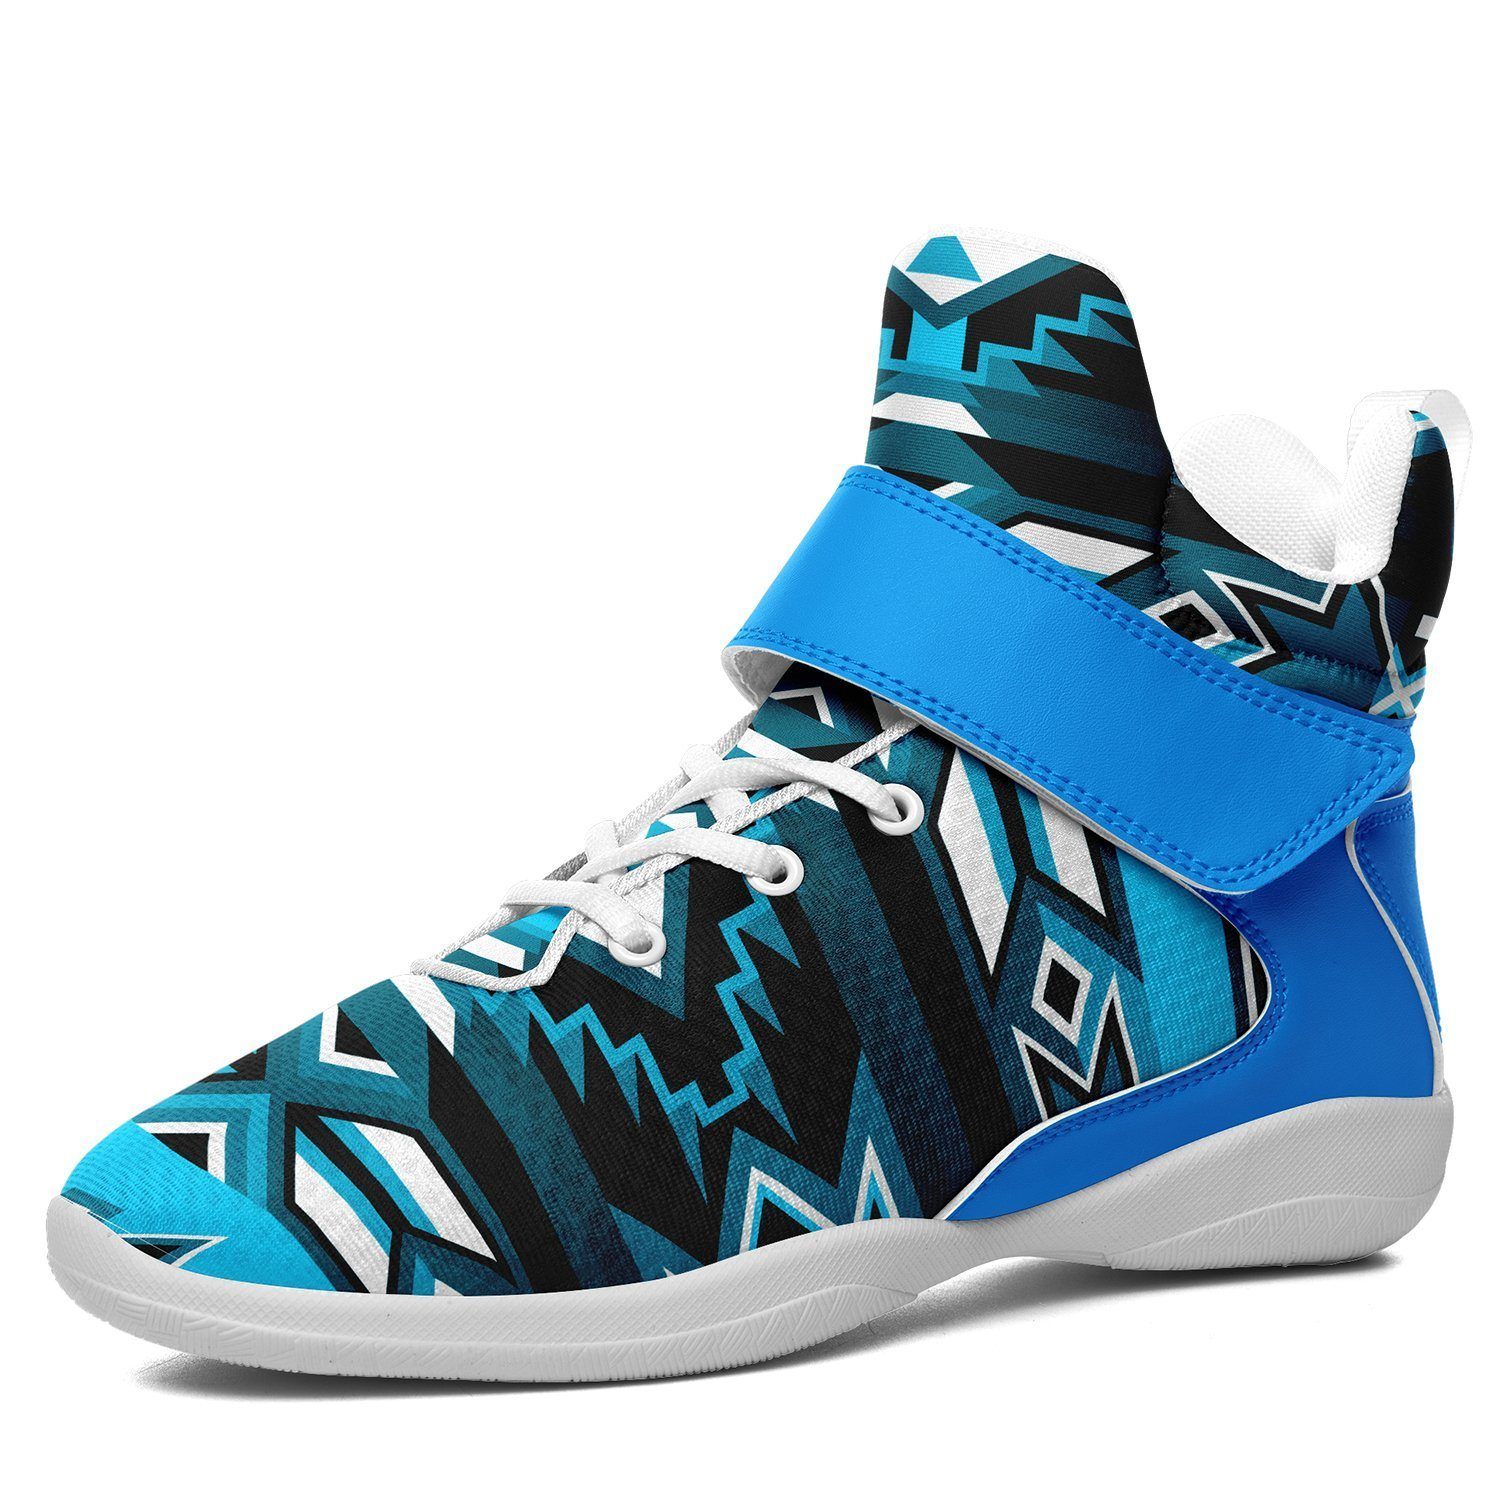 Northern Journey Kid's Ipottaa Basketball / Sport High Top Shoes 49 Dzine US Child 12.5/ EUR 30 White Sole with Light Blue Strap 